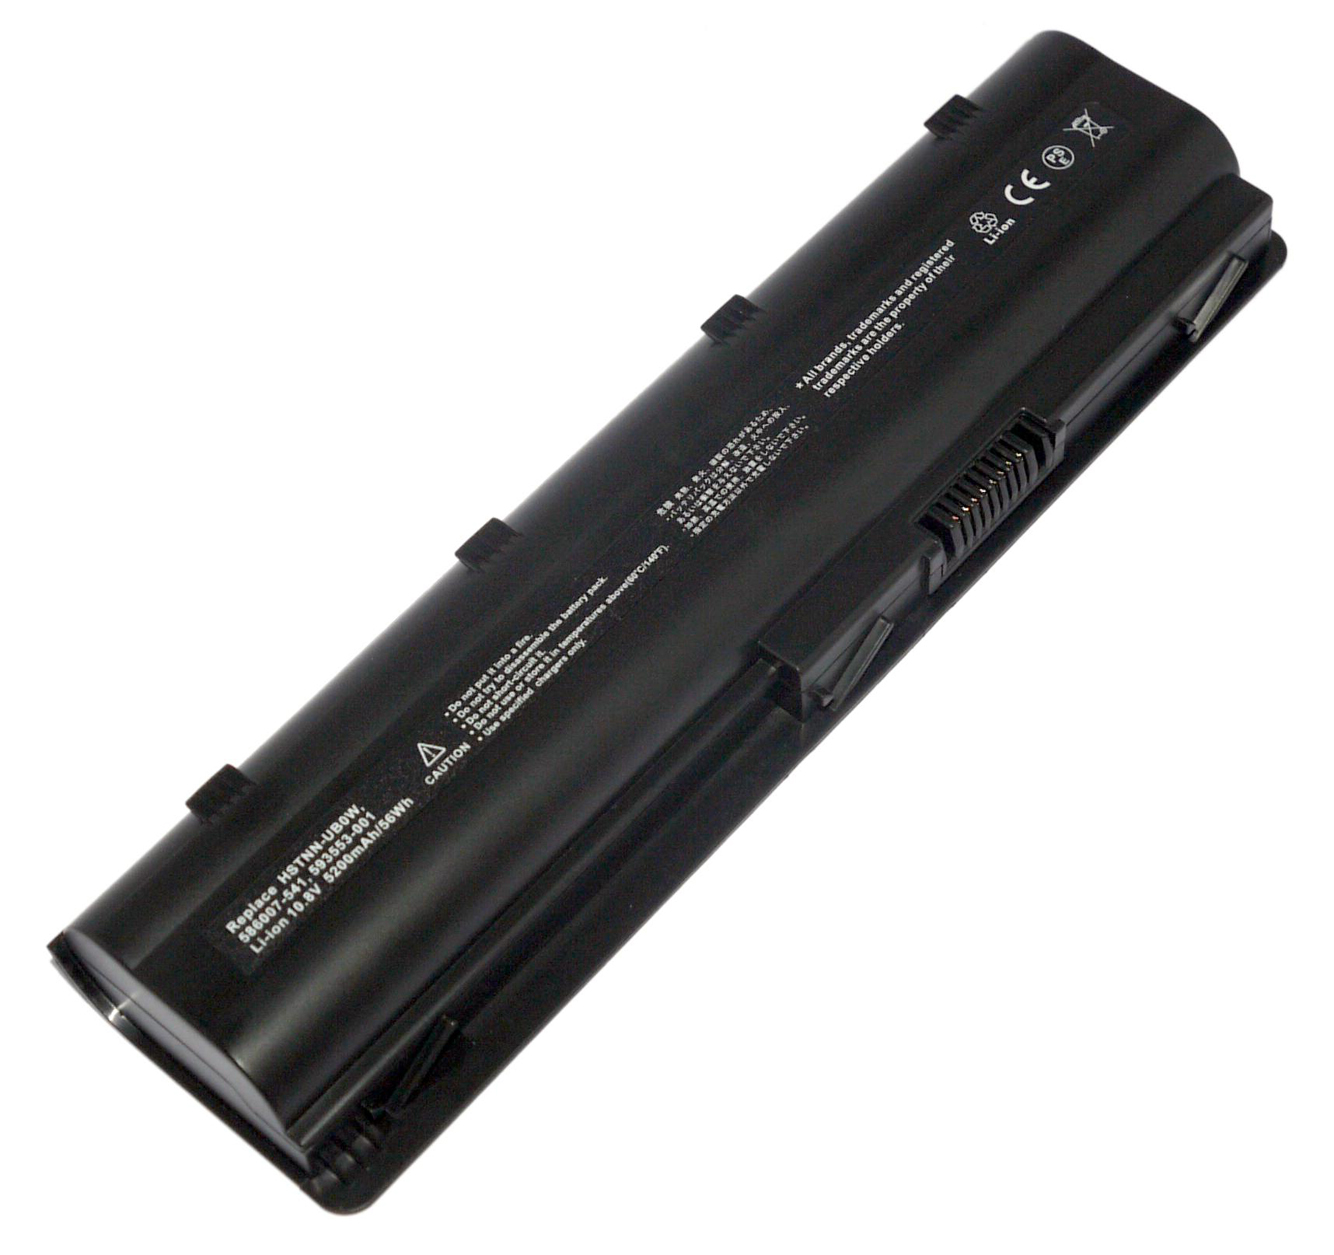 586006-321, 586006-361 replacement Laptop Battery for Compaq 435 Notebook PC, 436 Notebook PC, 5200mAh, 10.80V